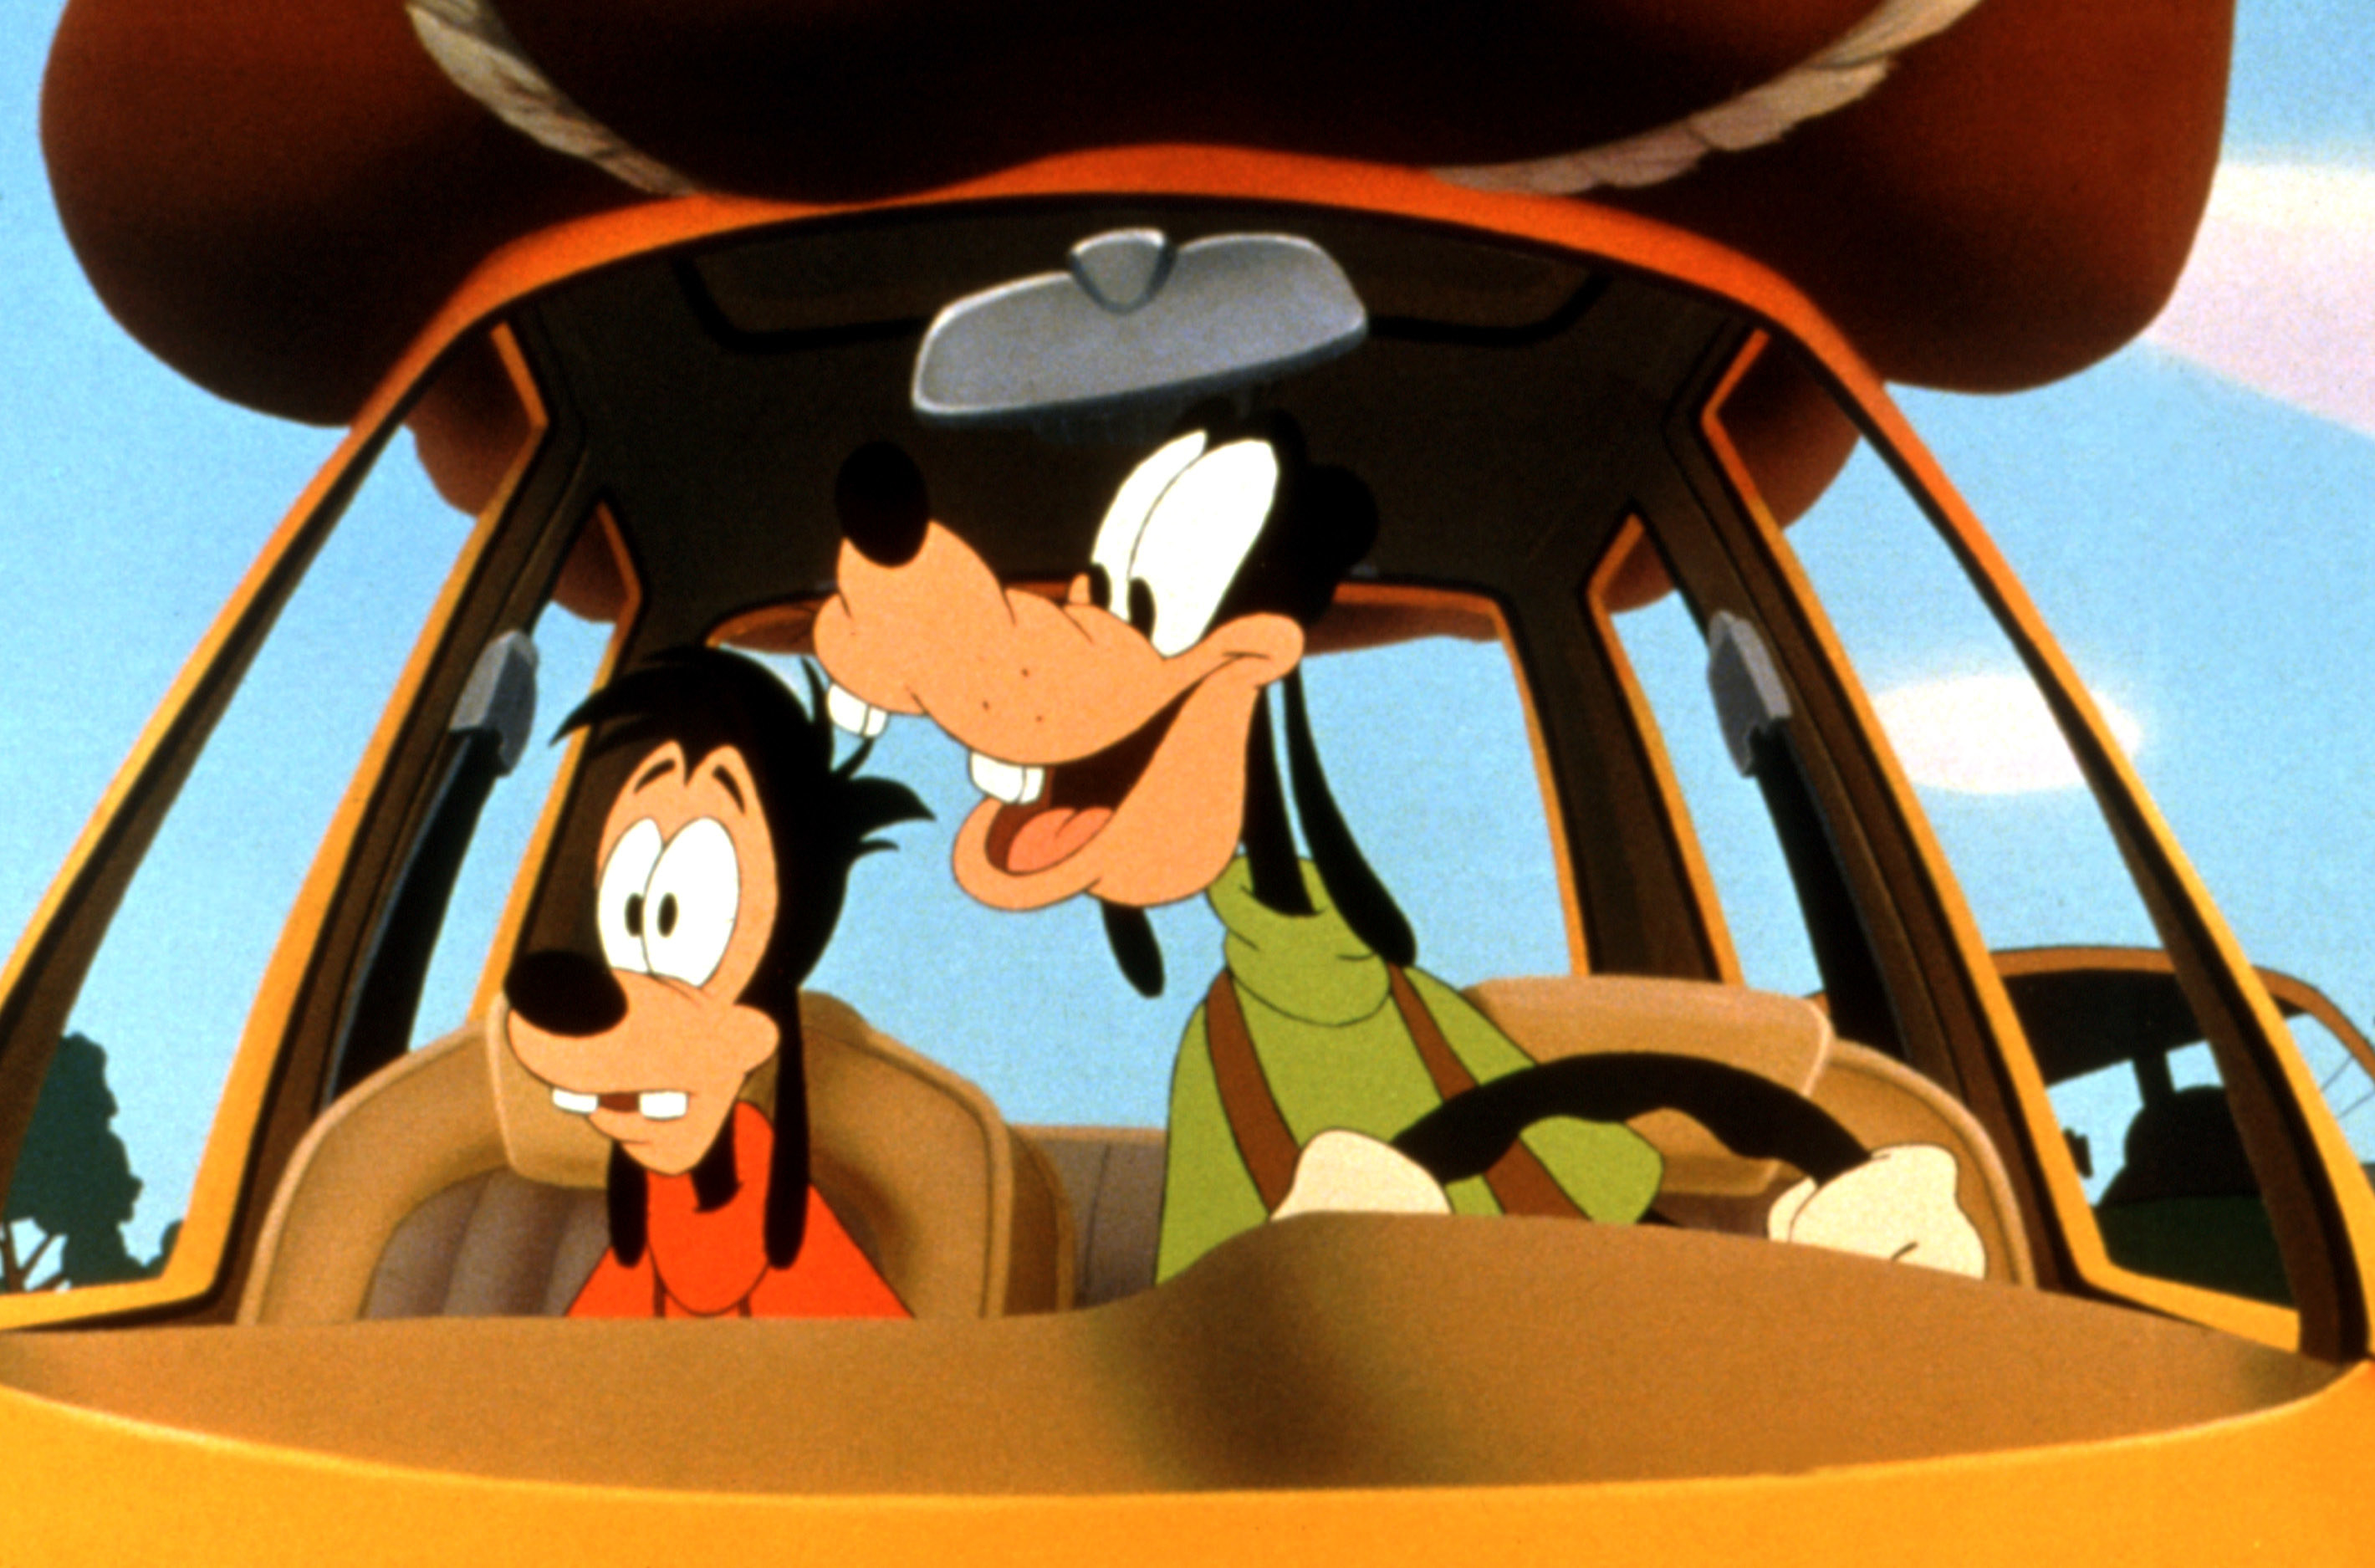 Goofy talking to Max in the car